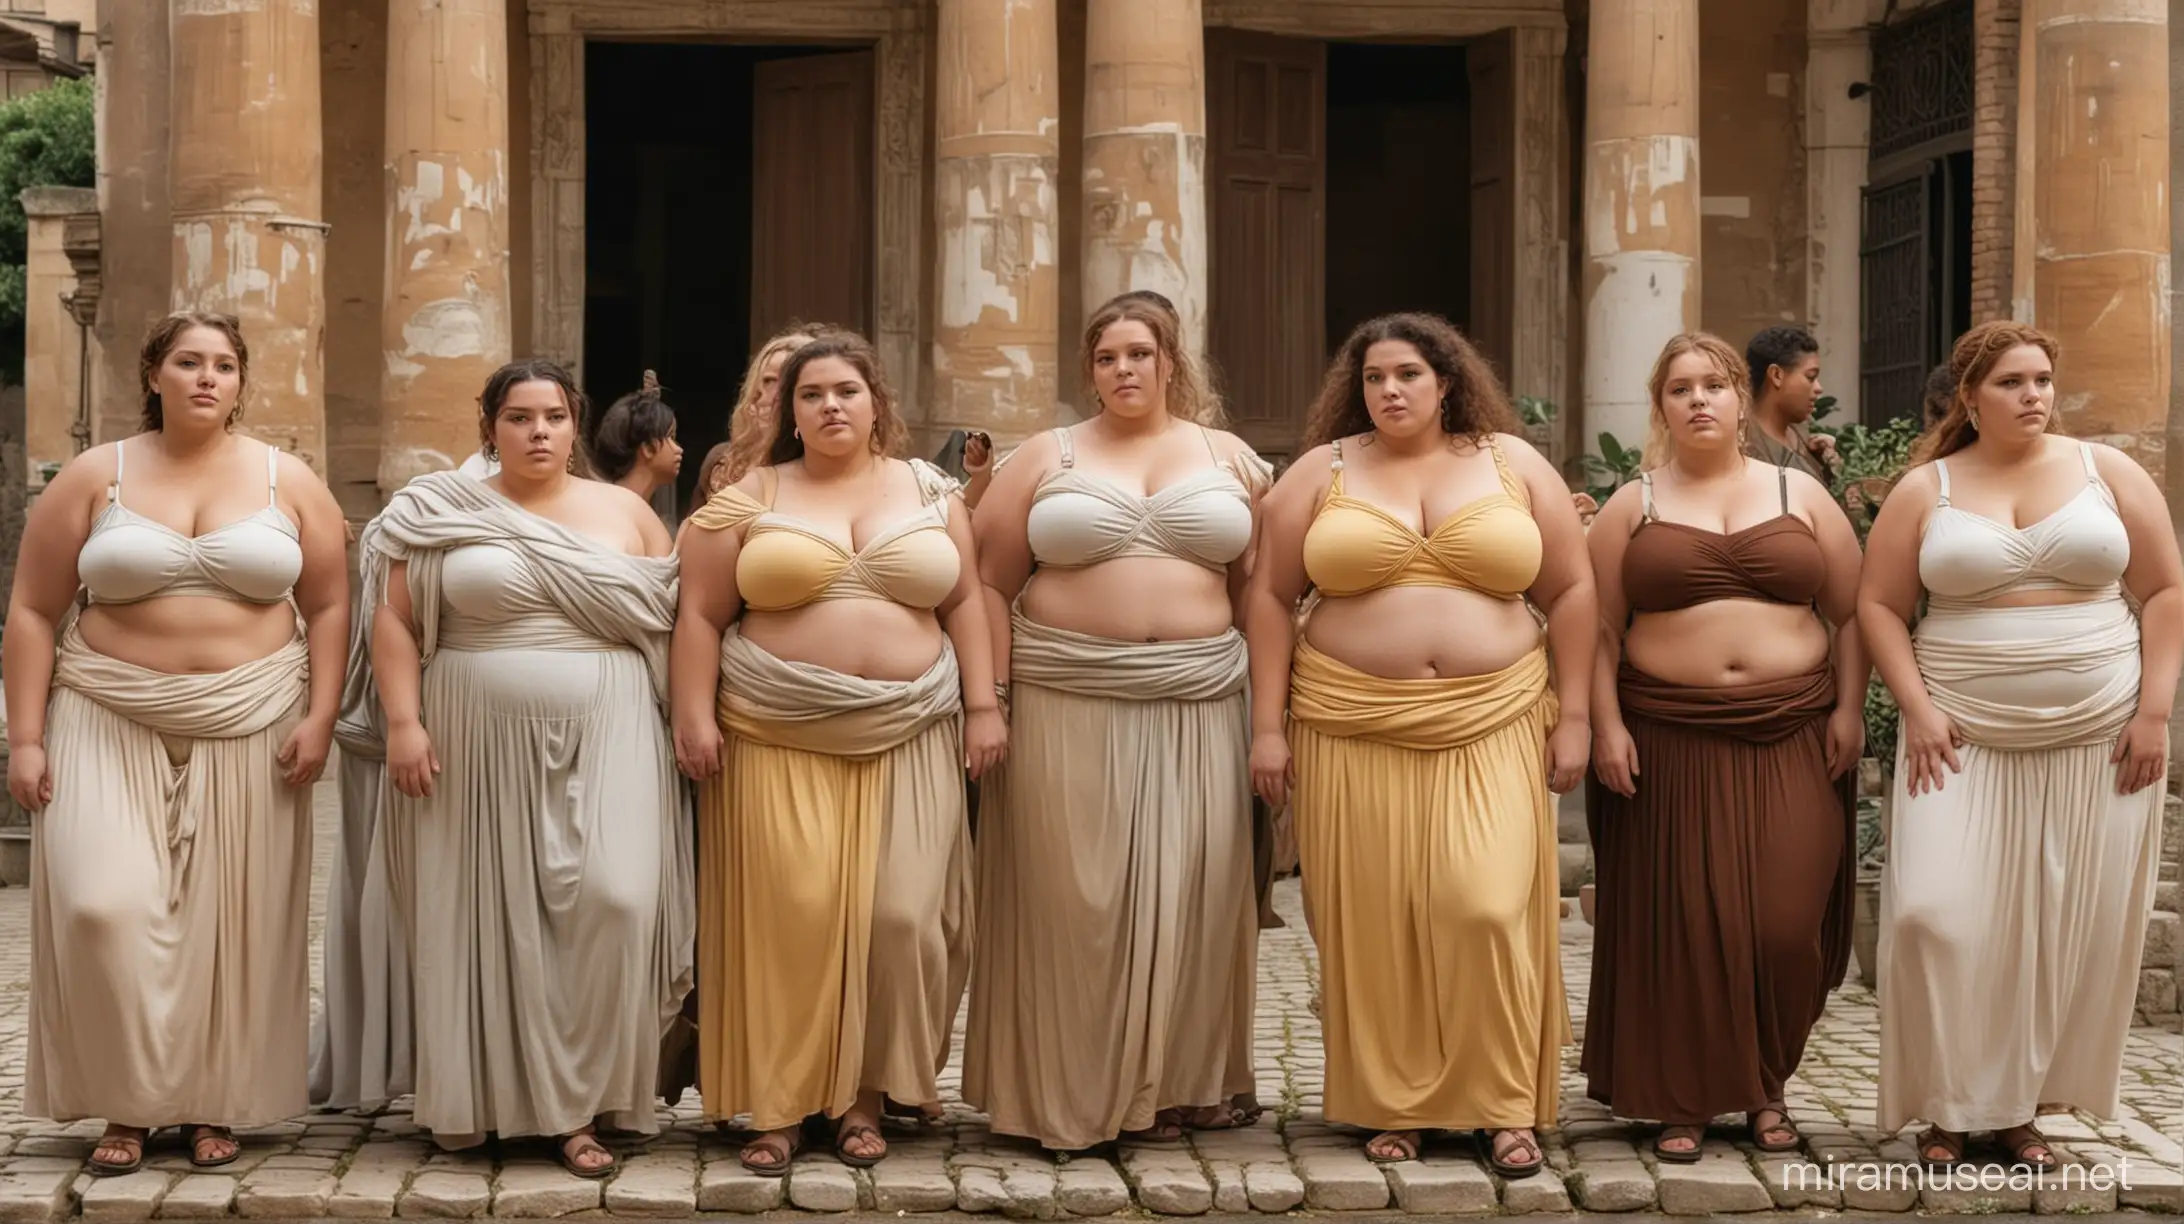 Diverse Group of SSBBW Women Standing in Ancient Roman Porch